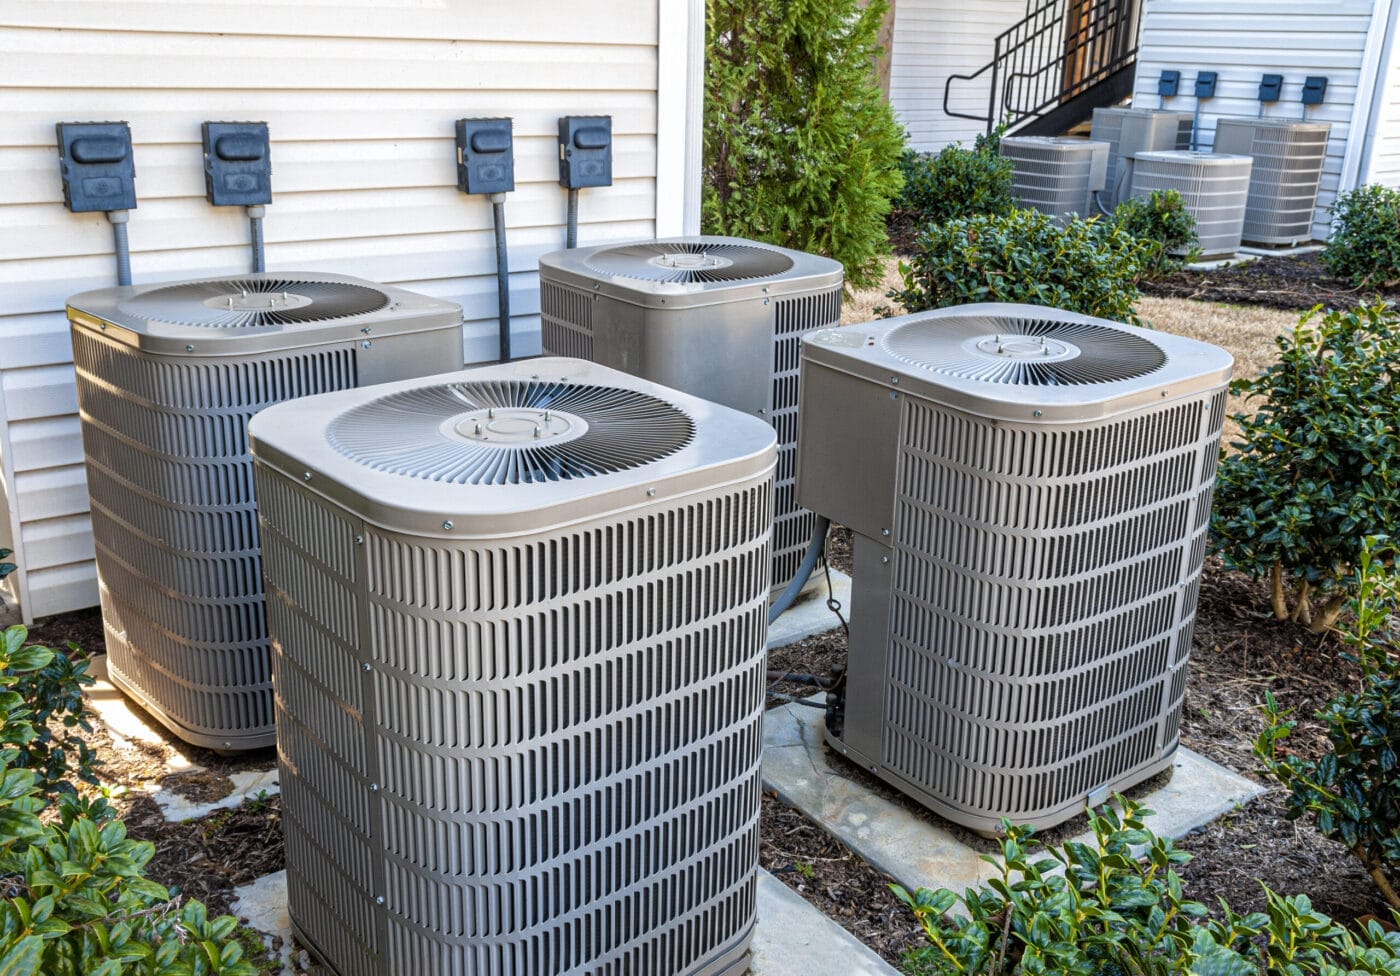 HVAC Units Connected to Apartments in Josephine AL